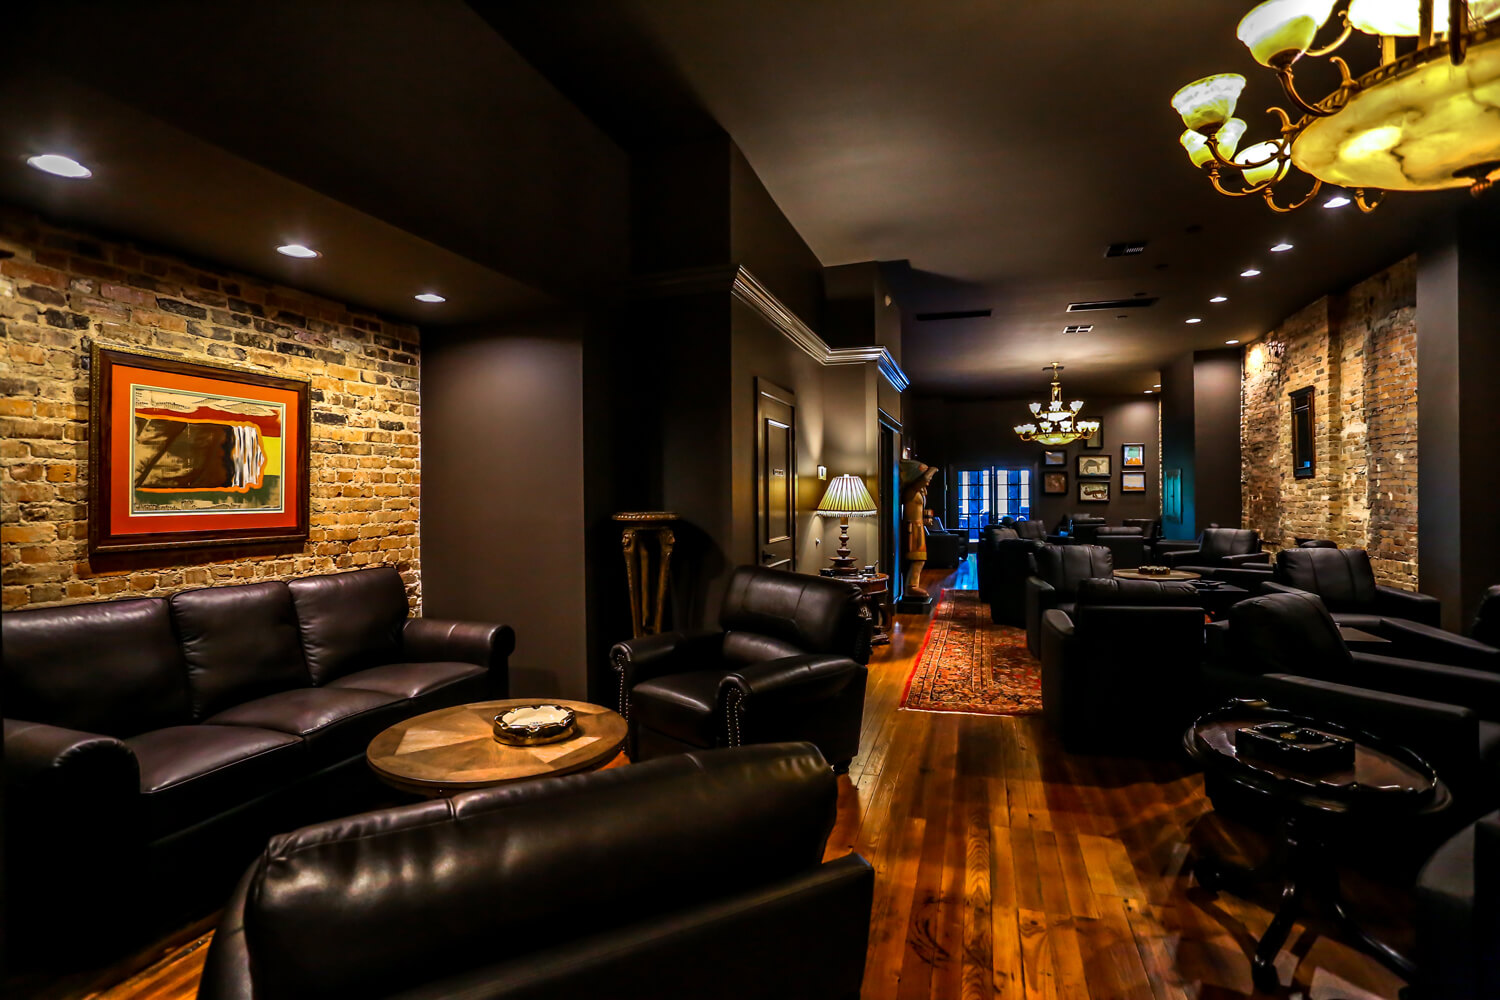 Cigar Store - Second Floor Seating - Designed by Foshee Architecture